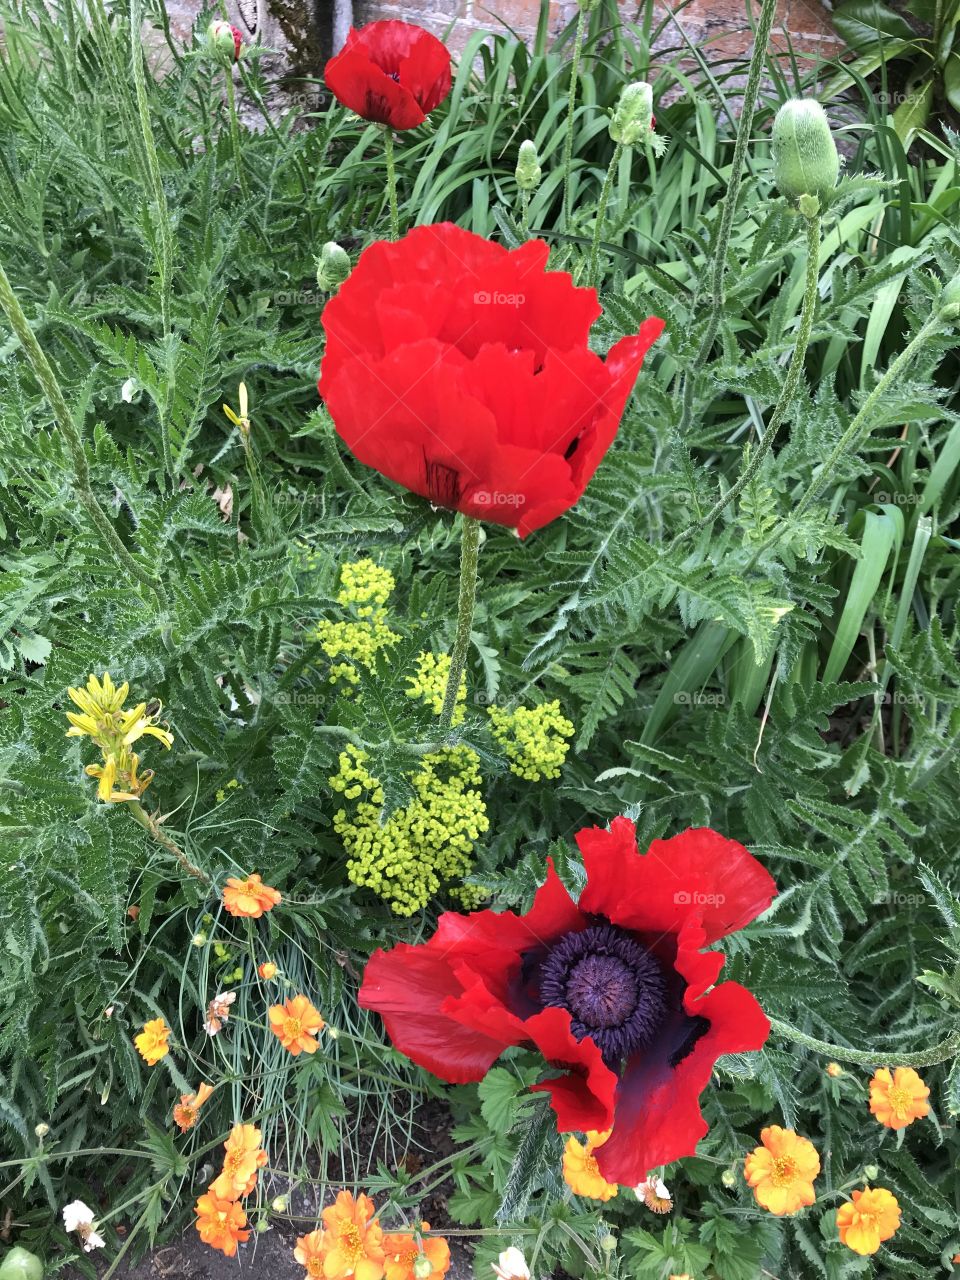 Some lovely examples of poppies in fine shape and giving a huge splash of color to these gardens.